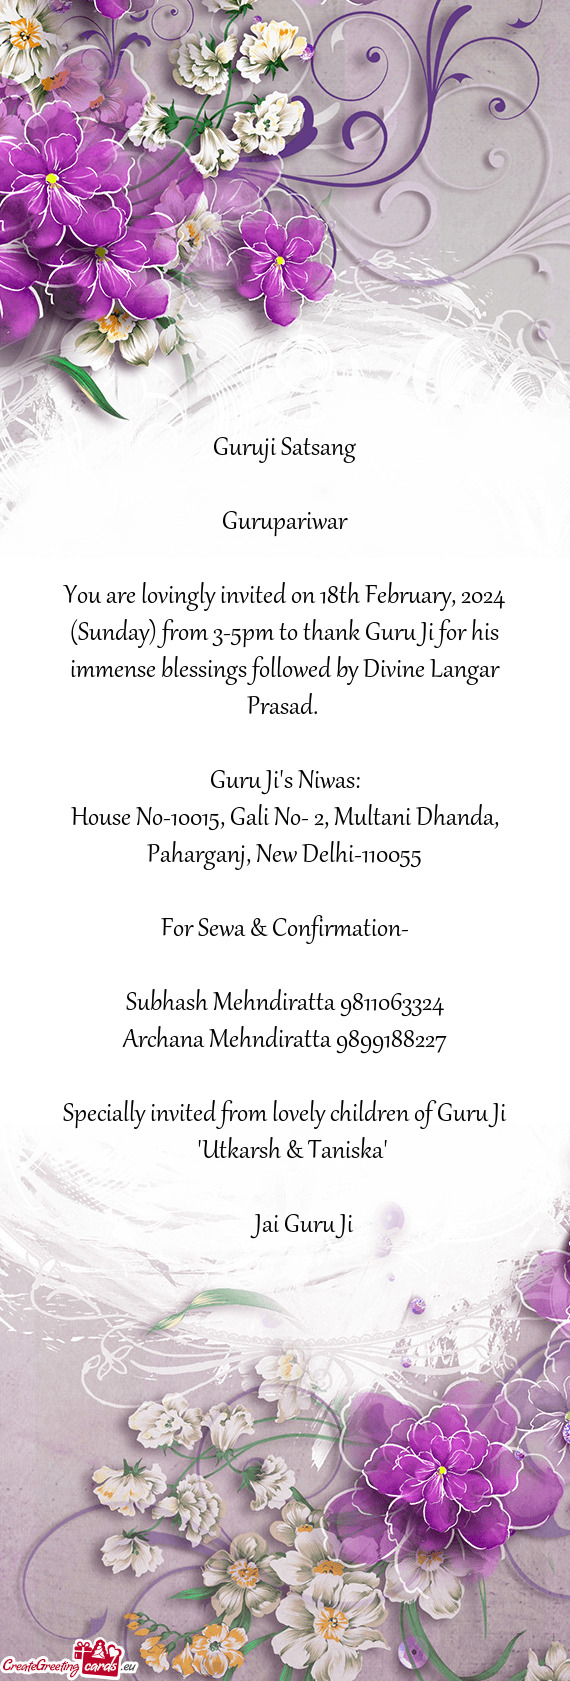 You are lovingly invited on 18th February, 2024 (Sunday) from 3-5pm to thank Guru Ji for his immense